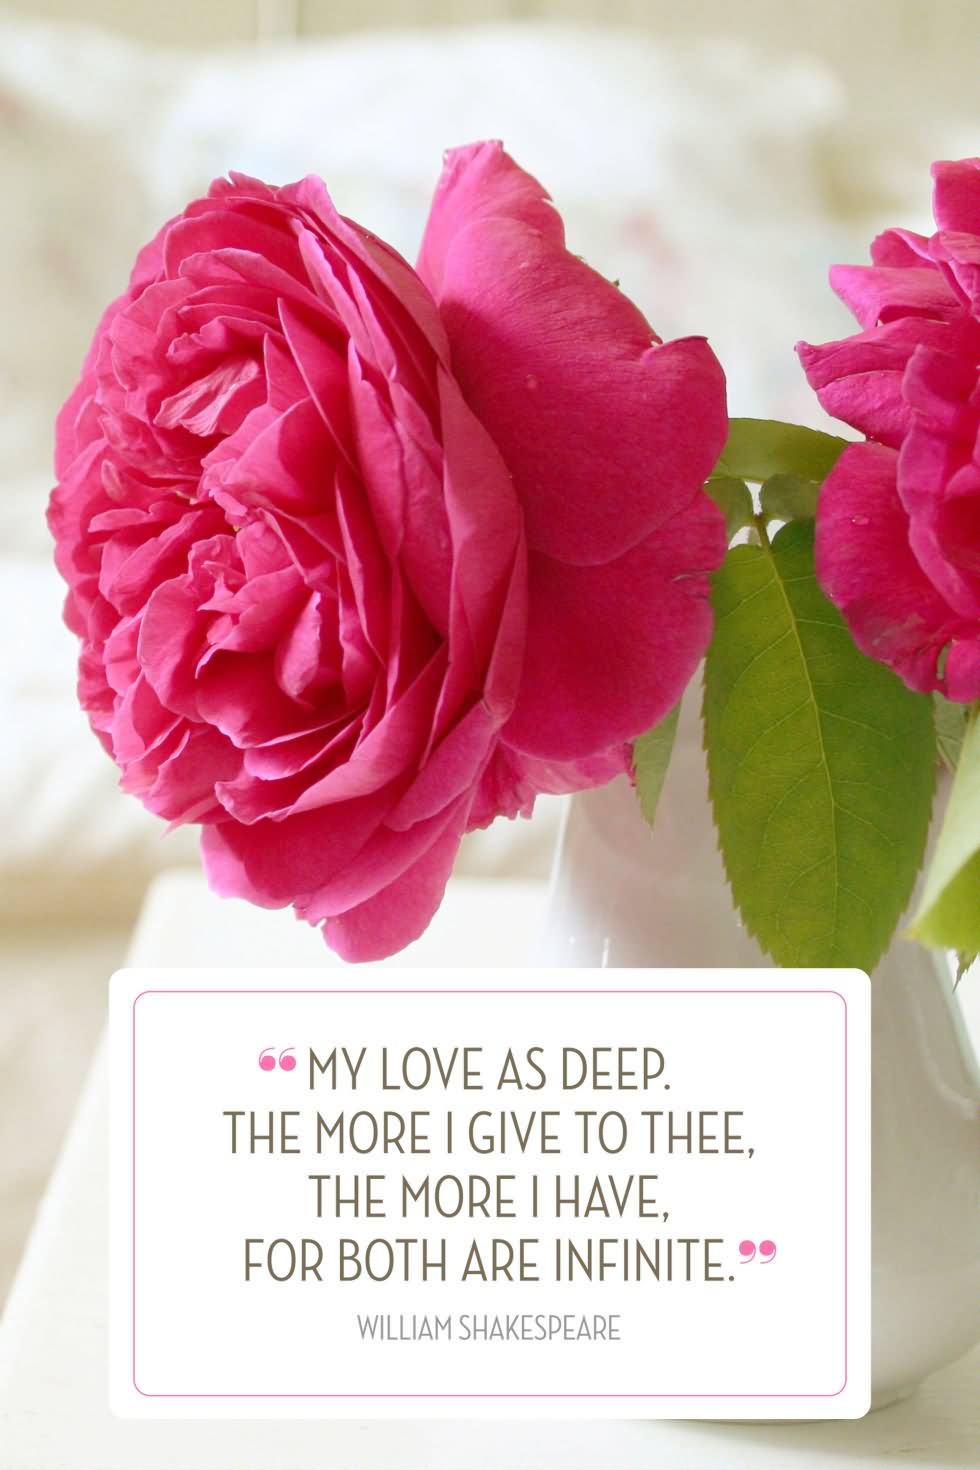 My love is deep.the more i give to thee, the more i have,for both are infinite.